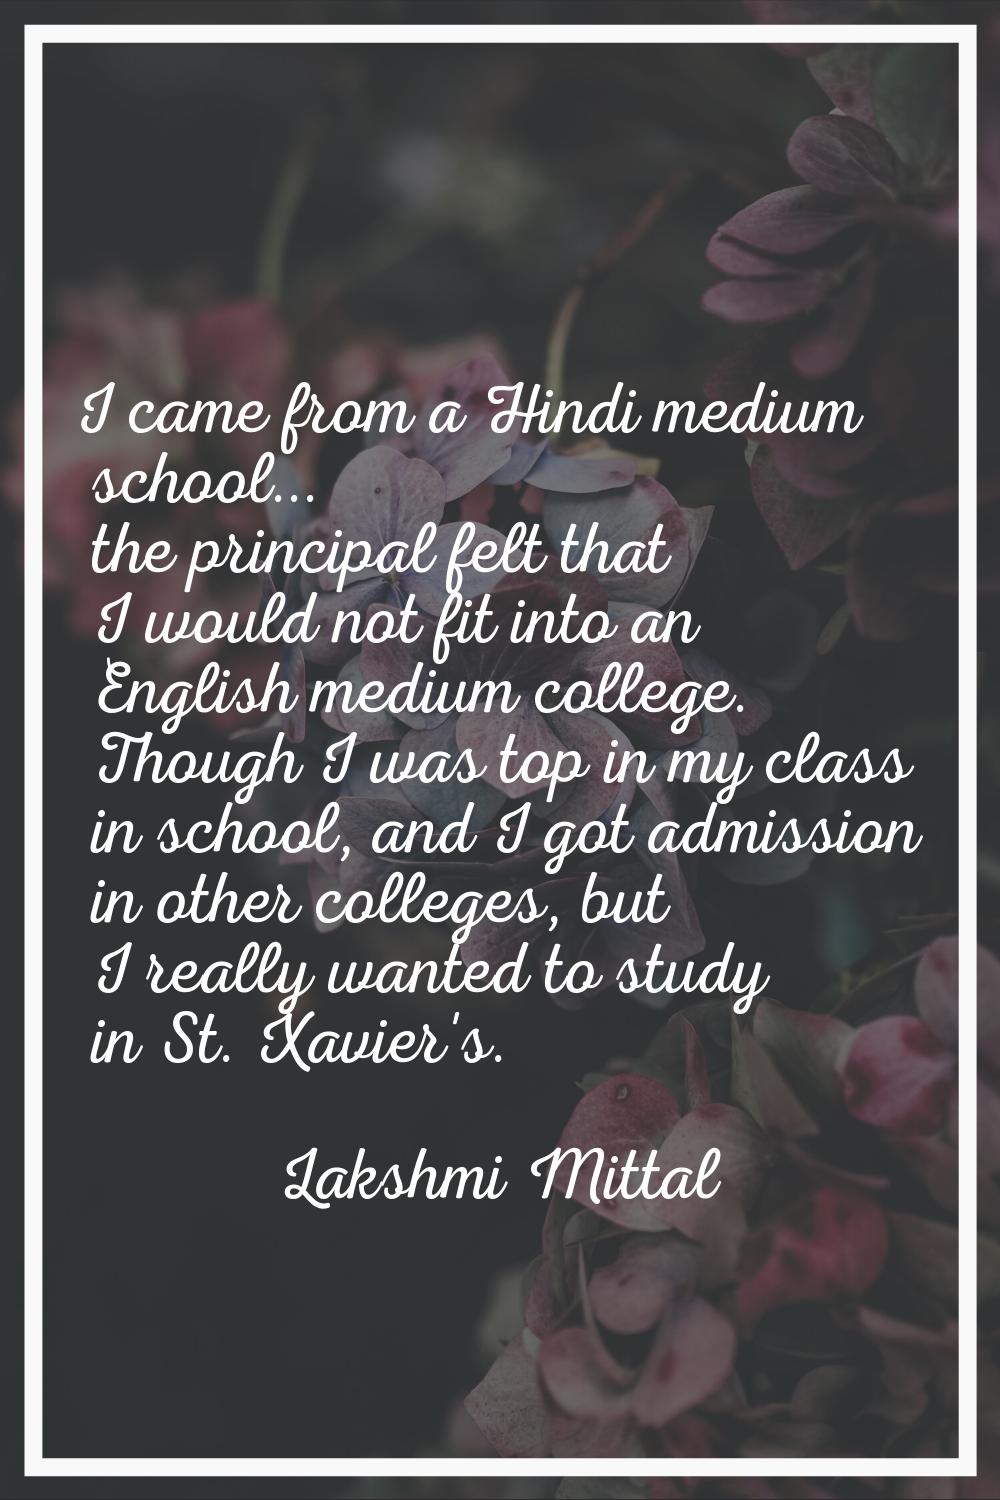 I came from a Hindi medium school... the principal felt that I would not fit into an English medium